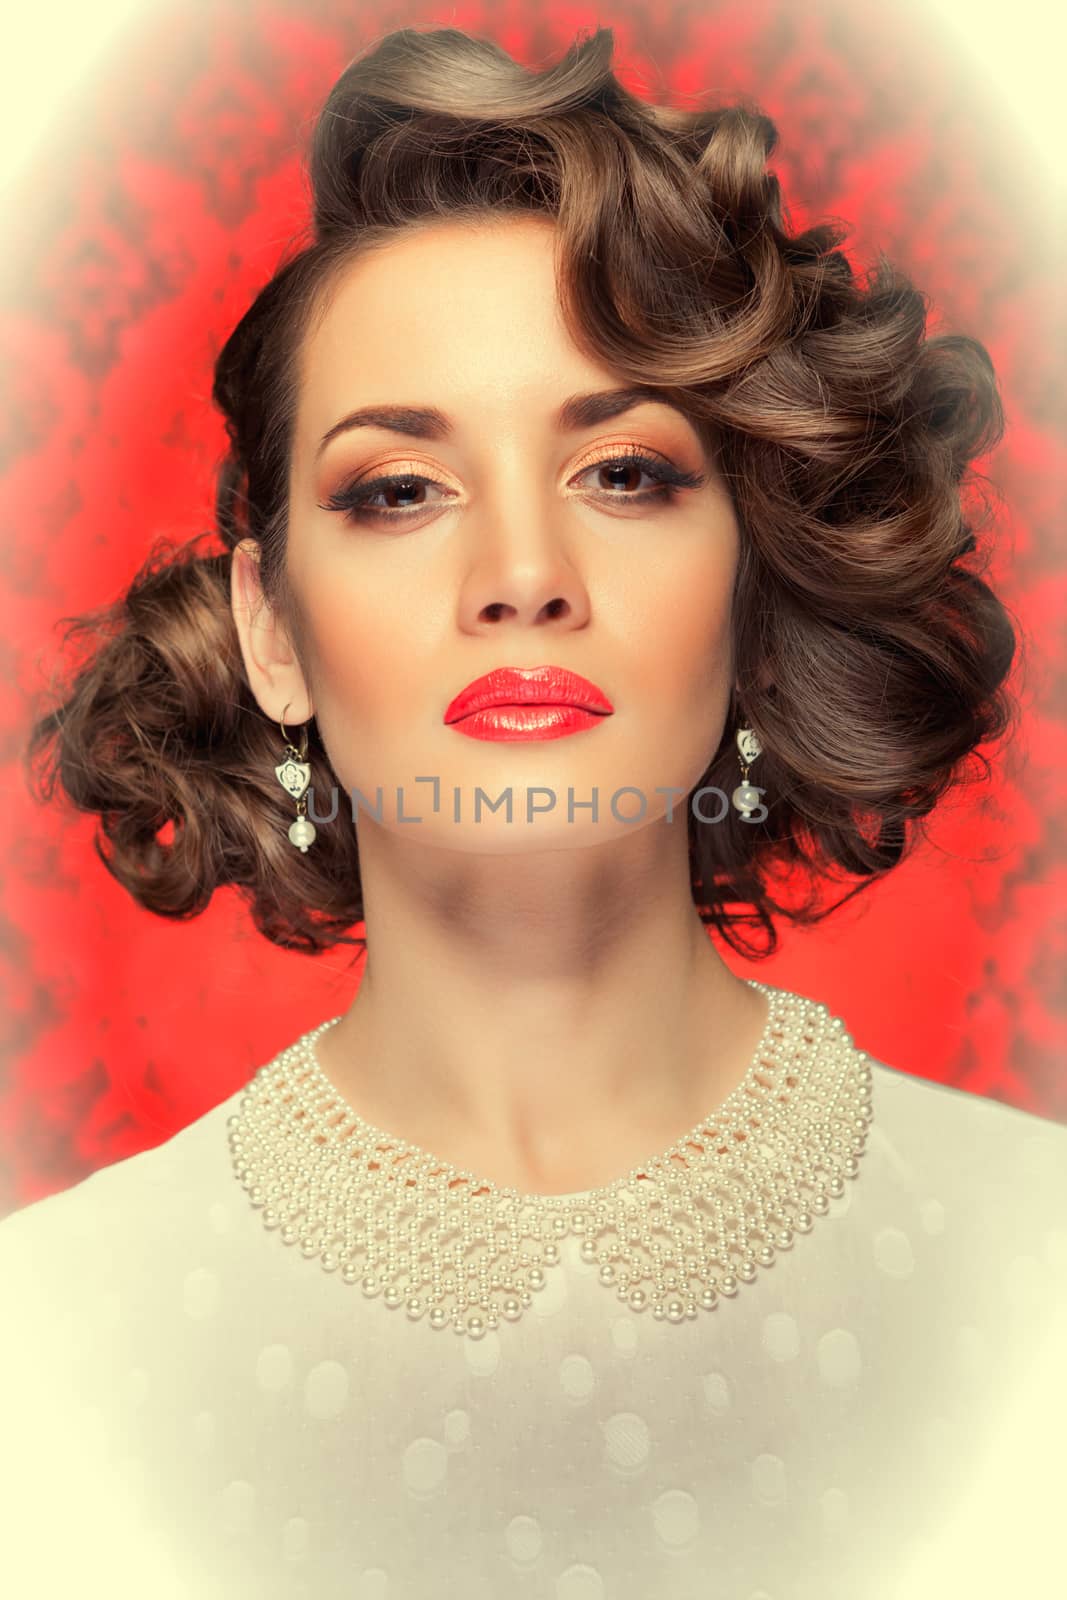 Retro style woman toned image on red vintage background. Professional make up and hairstyle. Studio lighting